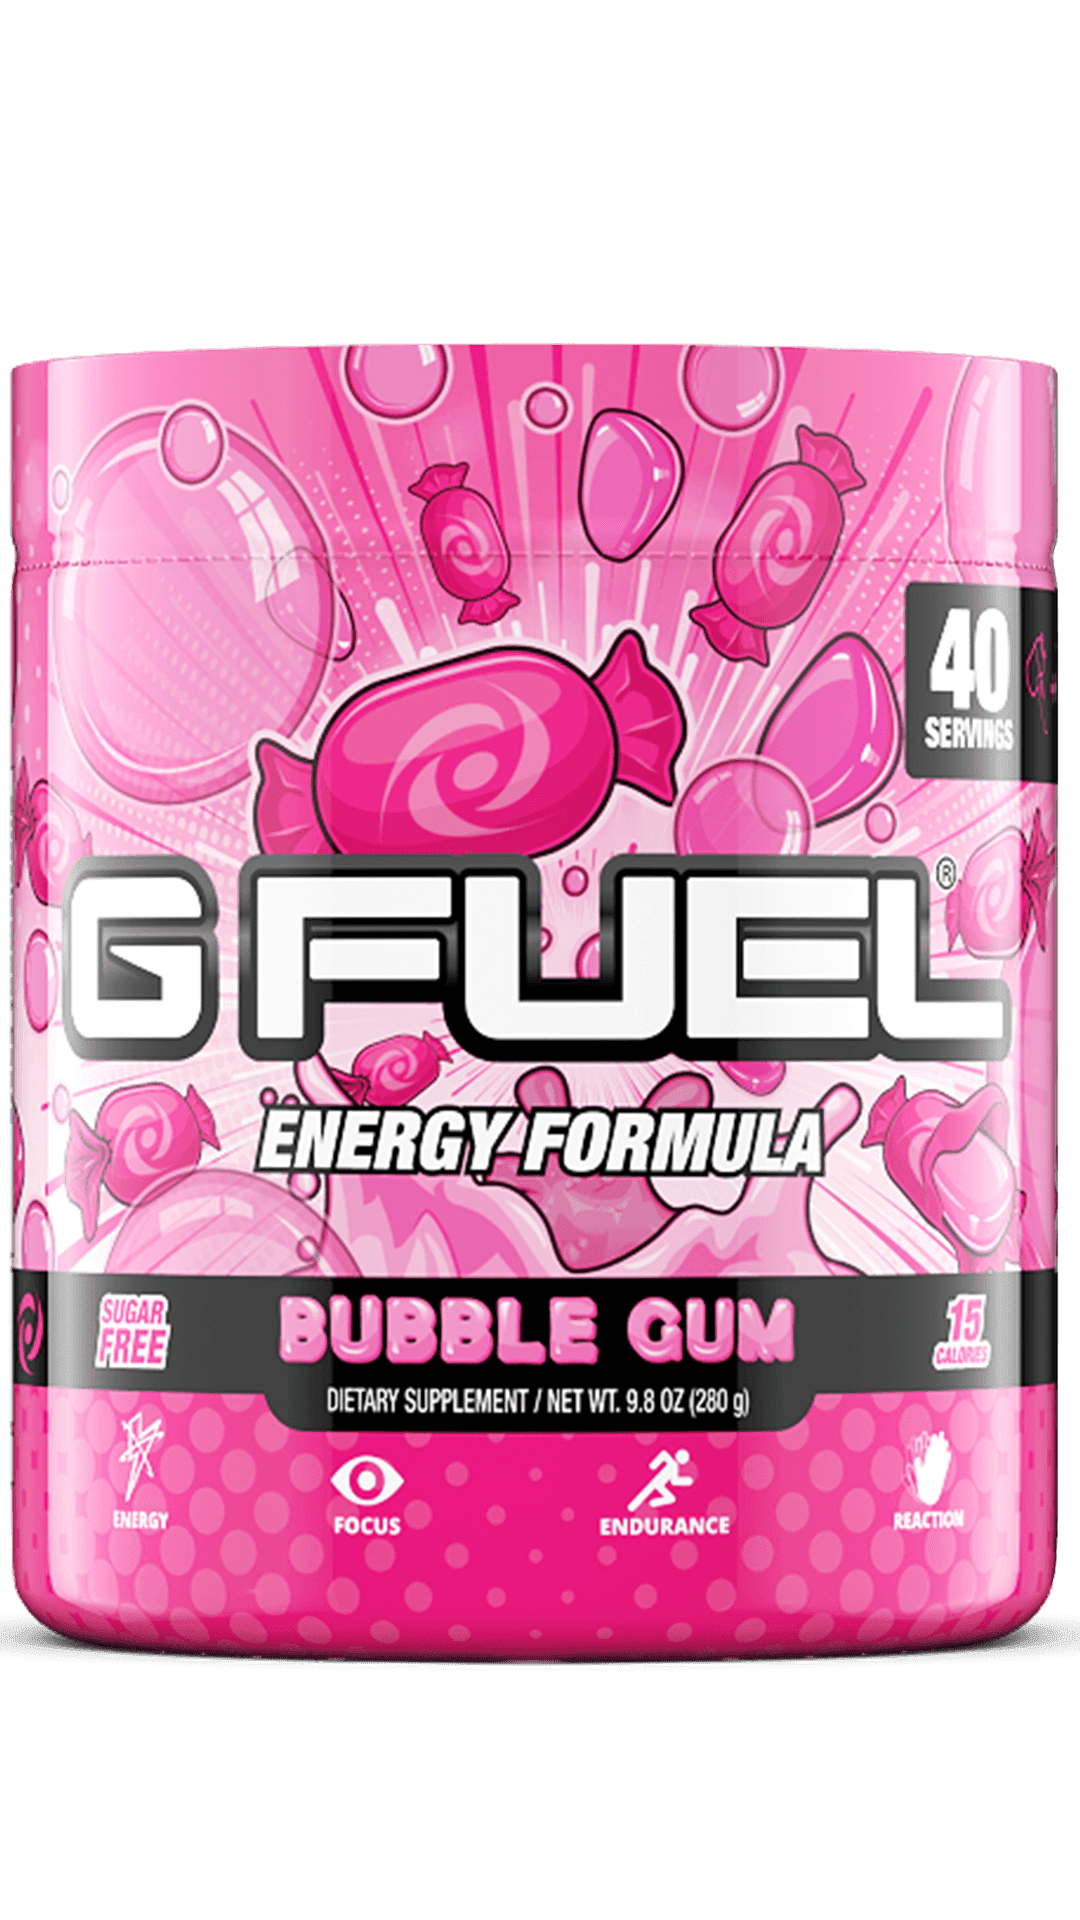 G FUEL® on X: 💜 𝗥𝗧 + 𝗖𝗢𝗠𝗠𝗘𝗡𝗧 🦄  to win a #GFUEL APP EXCLUSIVE  UNICORN STARTER KIT!!! 🤩 Picking 2 winners on Monday to celebrate the  launch of these MAGNIFICENT